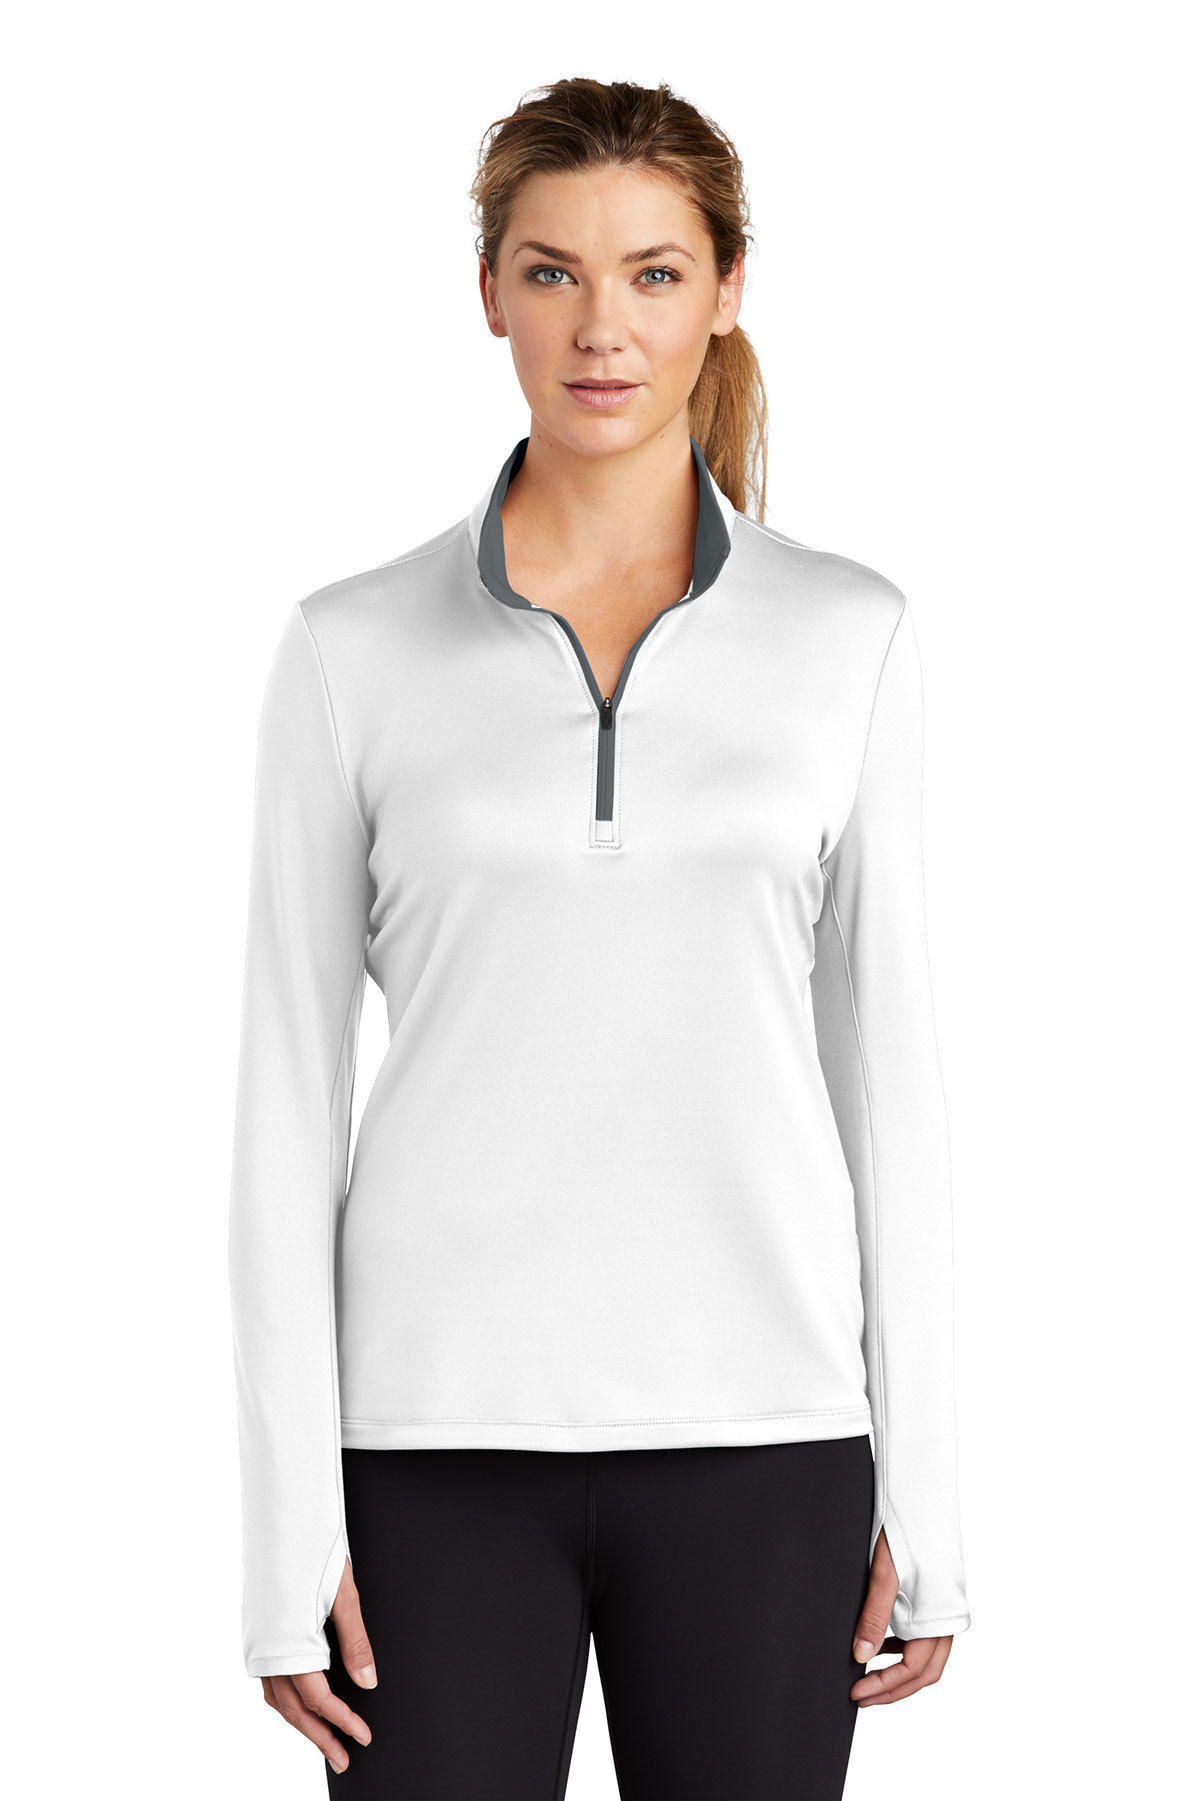 Nike Ladies Dri-FIT Stretch 1/2-Zip Cover-Up | Product | SanMar